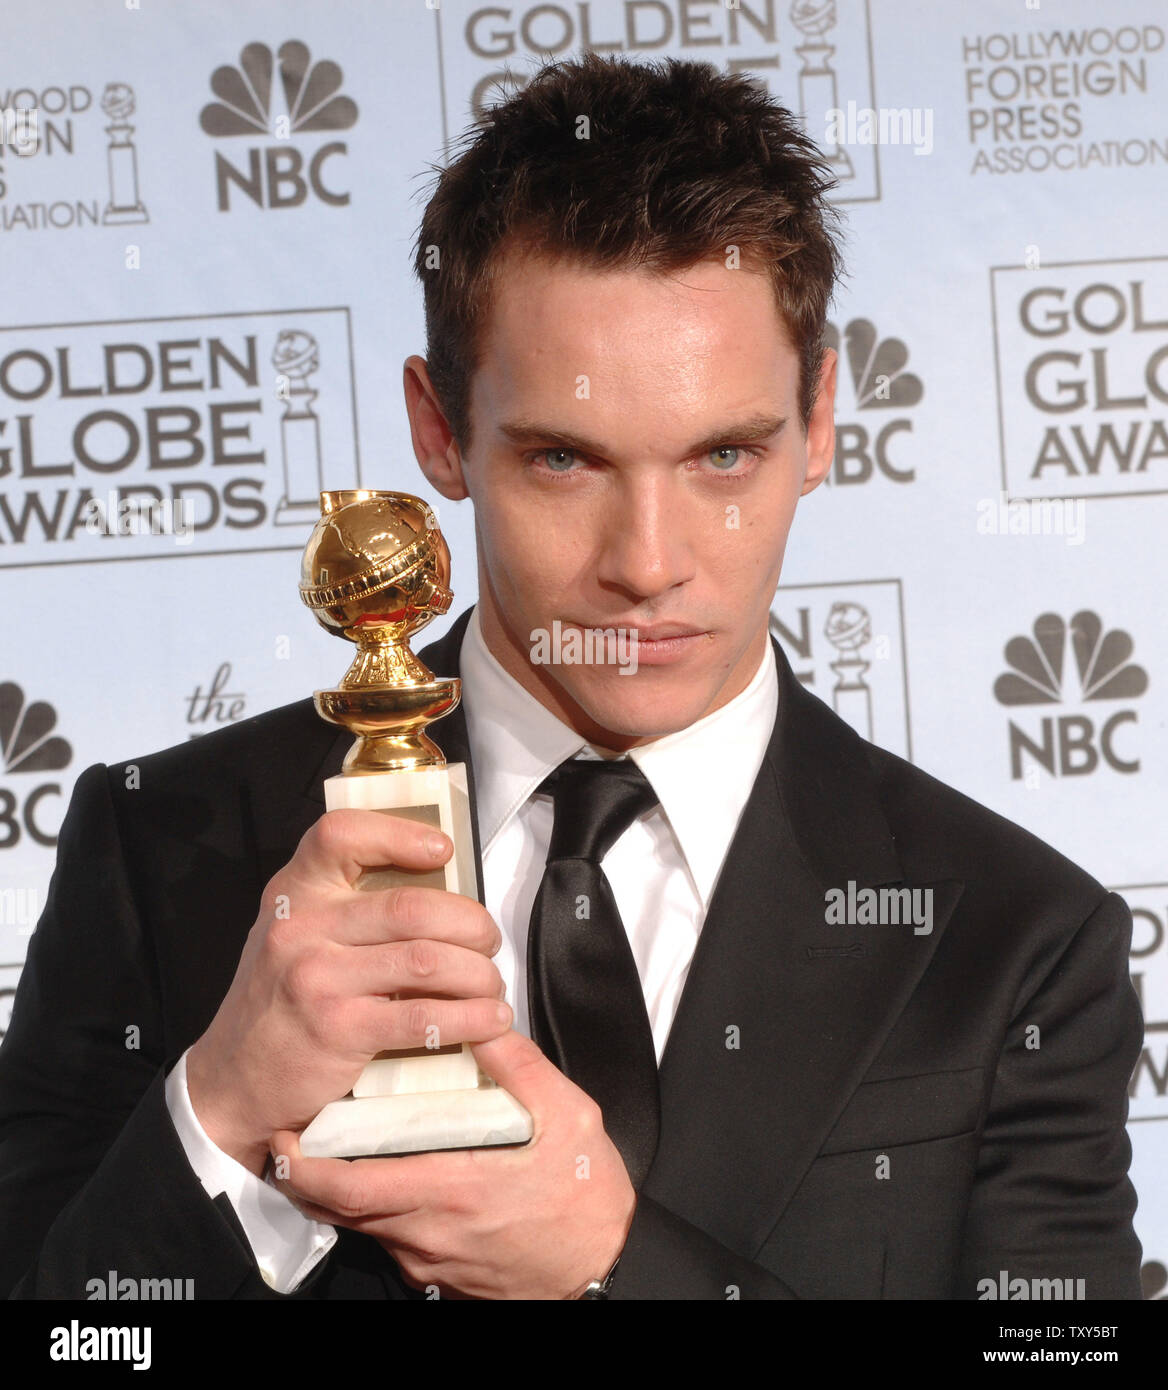 Jonathan Rhys Meyers holds his award for 'Elvis' at the 63rd annual Golden Globe Awards in Beverly Hills, CA on January 16, 2006.  (UPI Photo/Jim Ruymen) Stock Photo